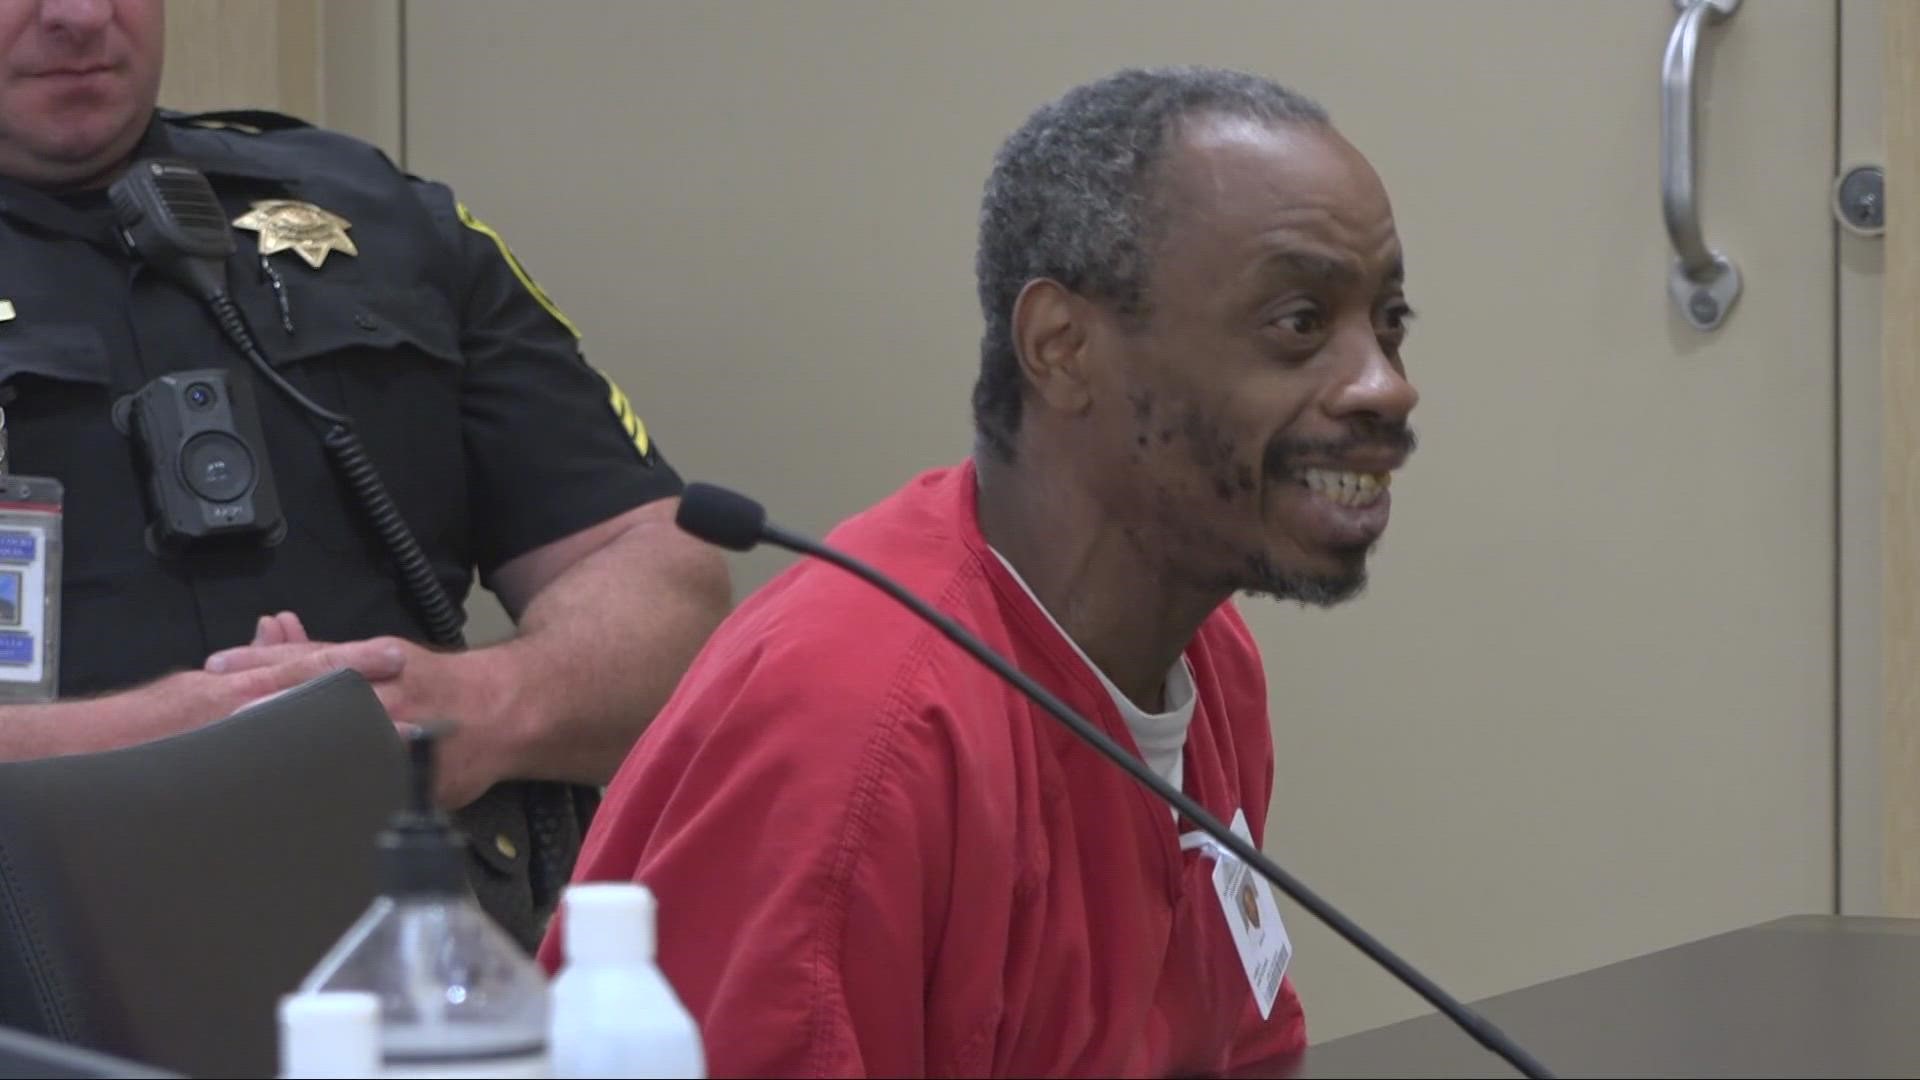 Anthony Gray, 52, who is currently charged with the murder of 15-year-old Alycia Reynaga at Stagg High School in Stockton, tried to plead guilty today in court.